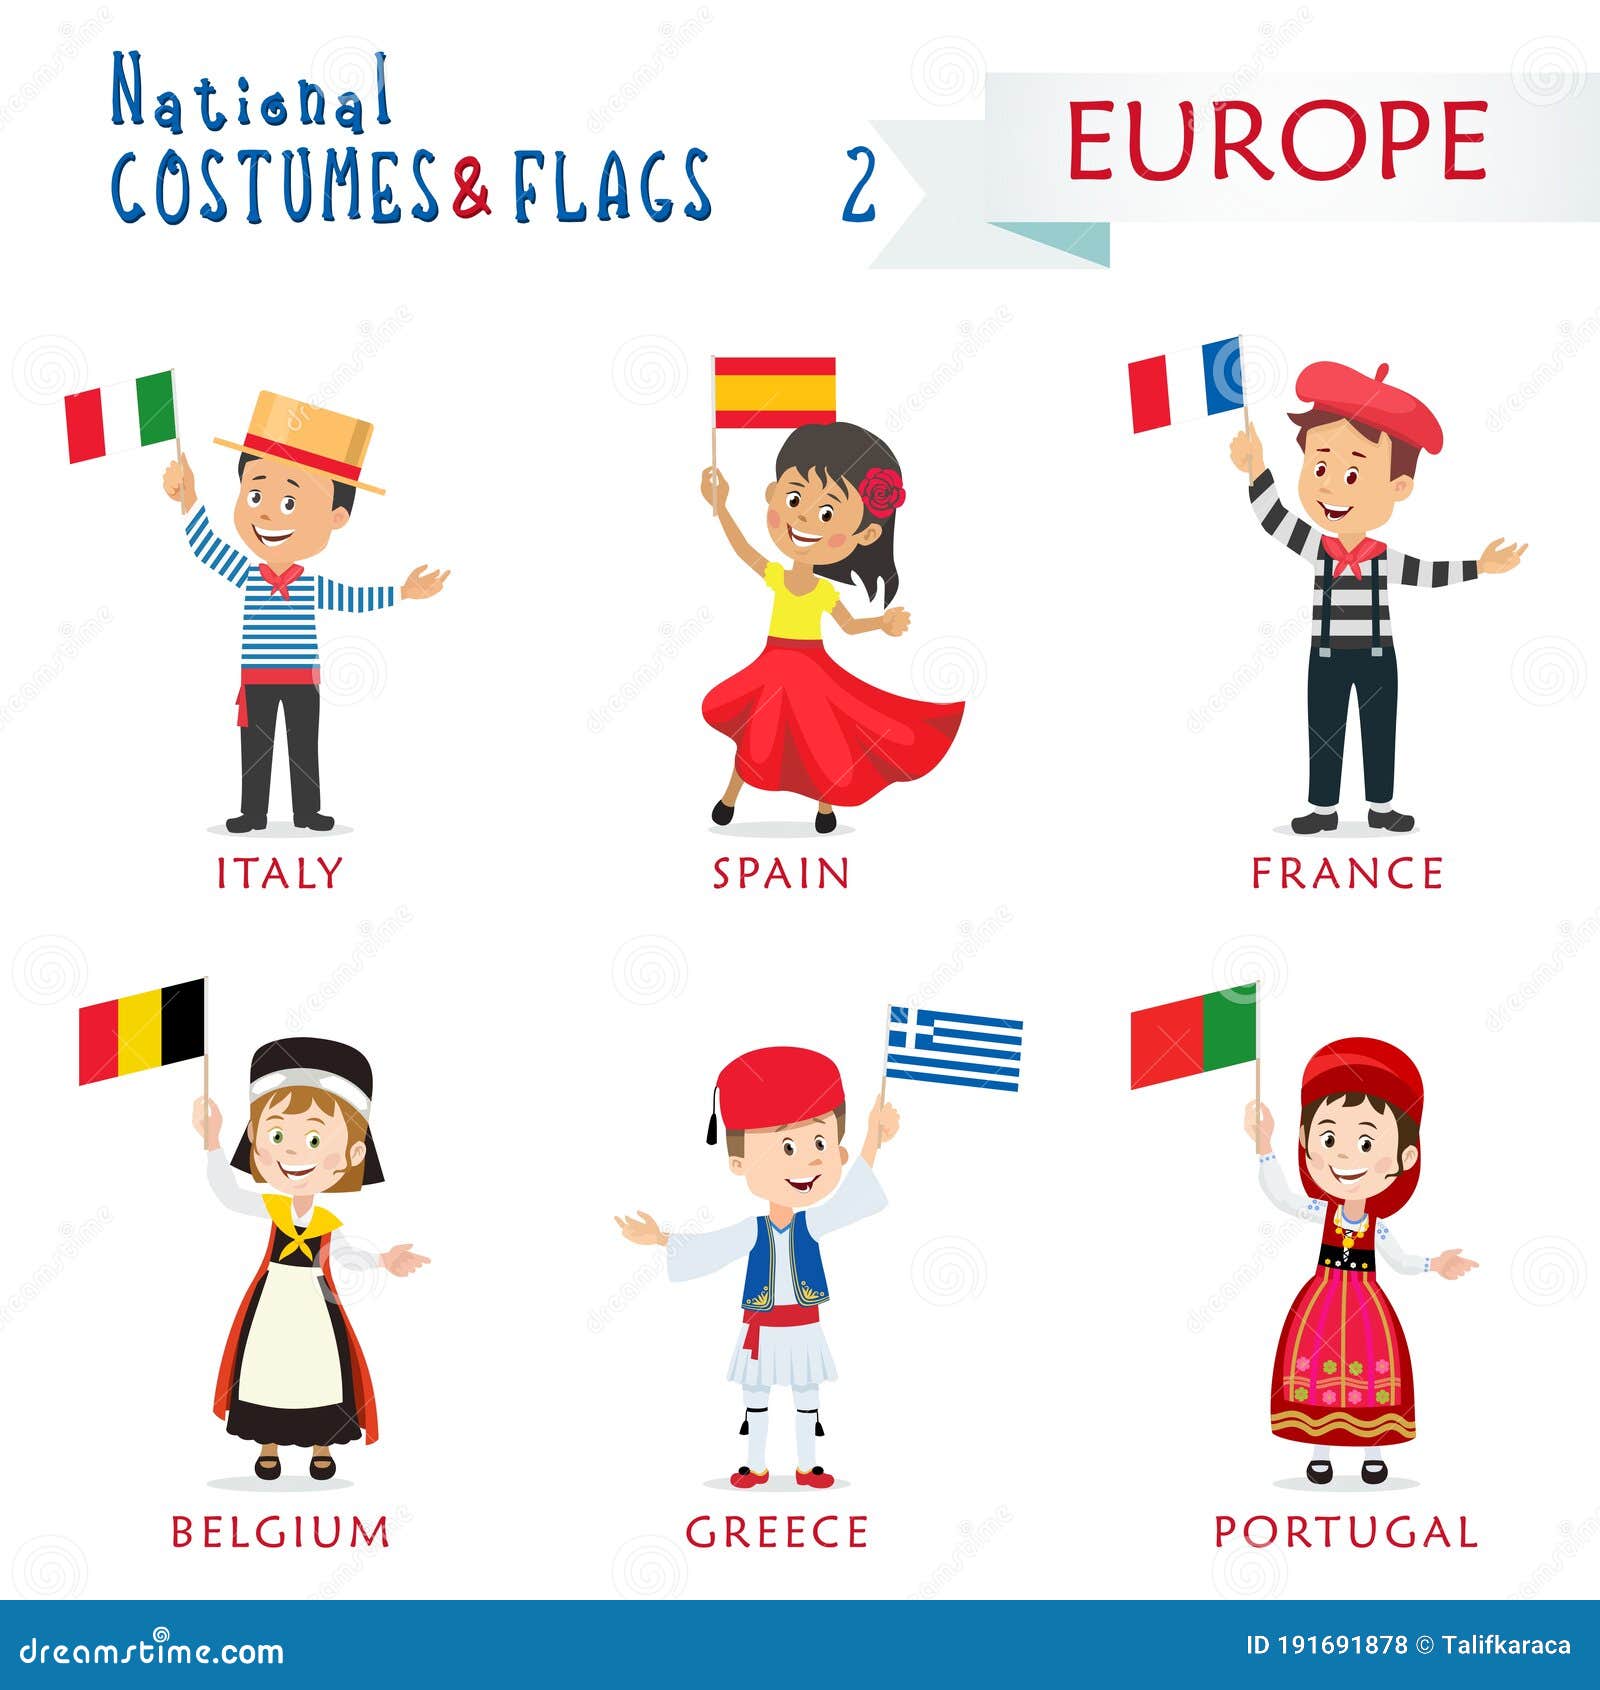 national costumes and flags of the nations - kids of the world - europe